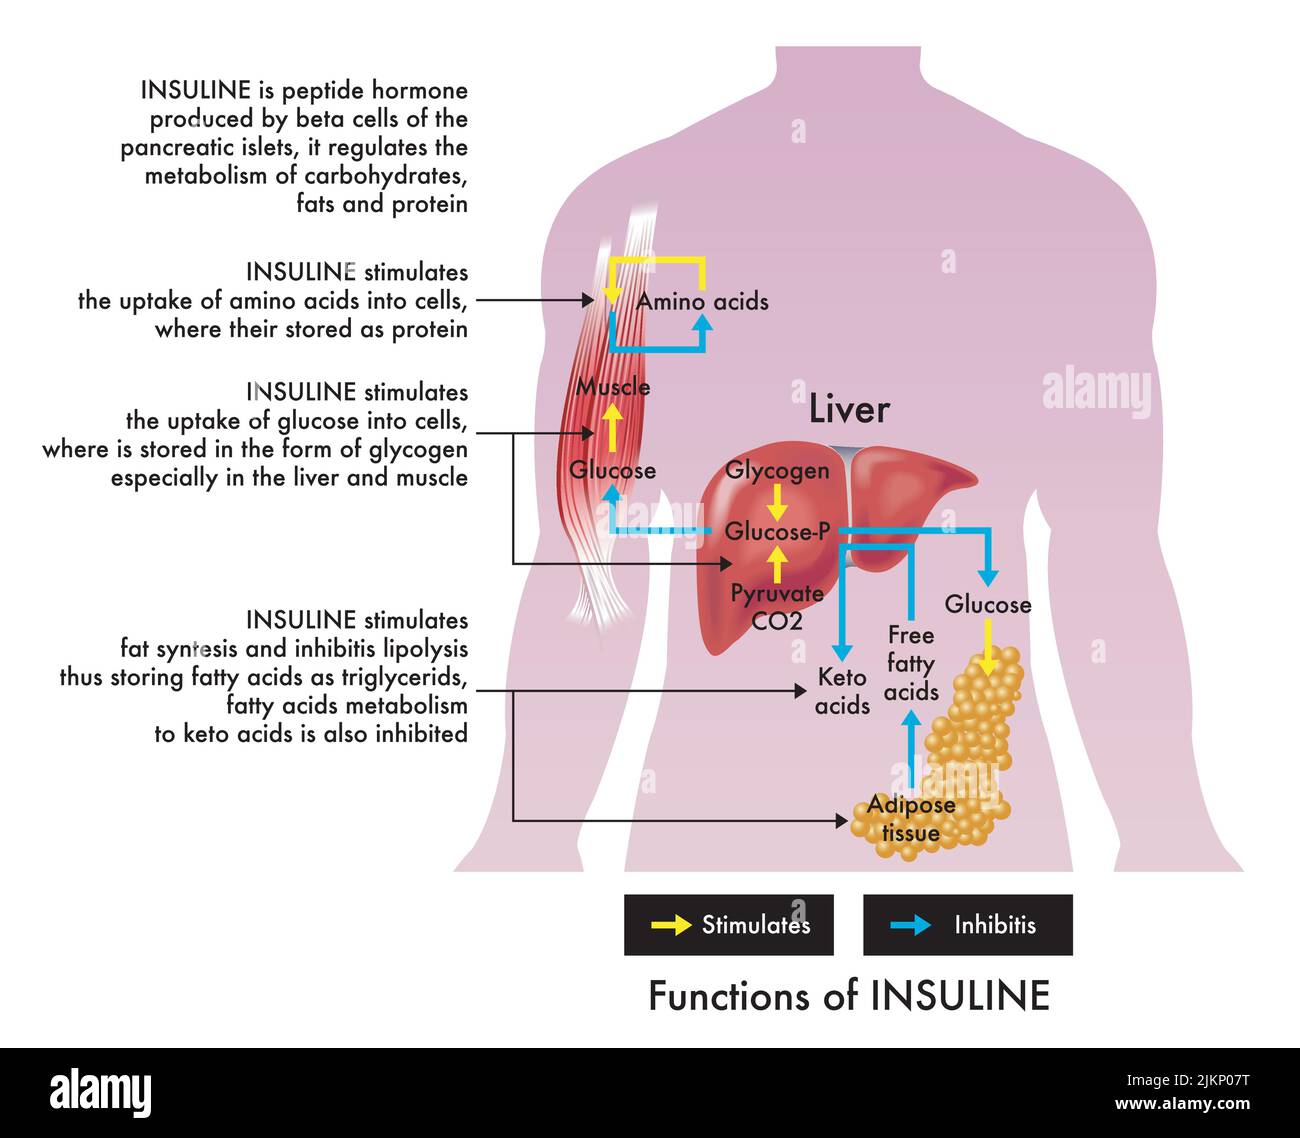 Medical illustration of insuline functions, with annotations. Stock Vector